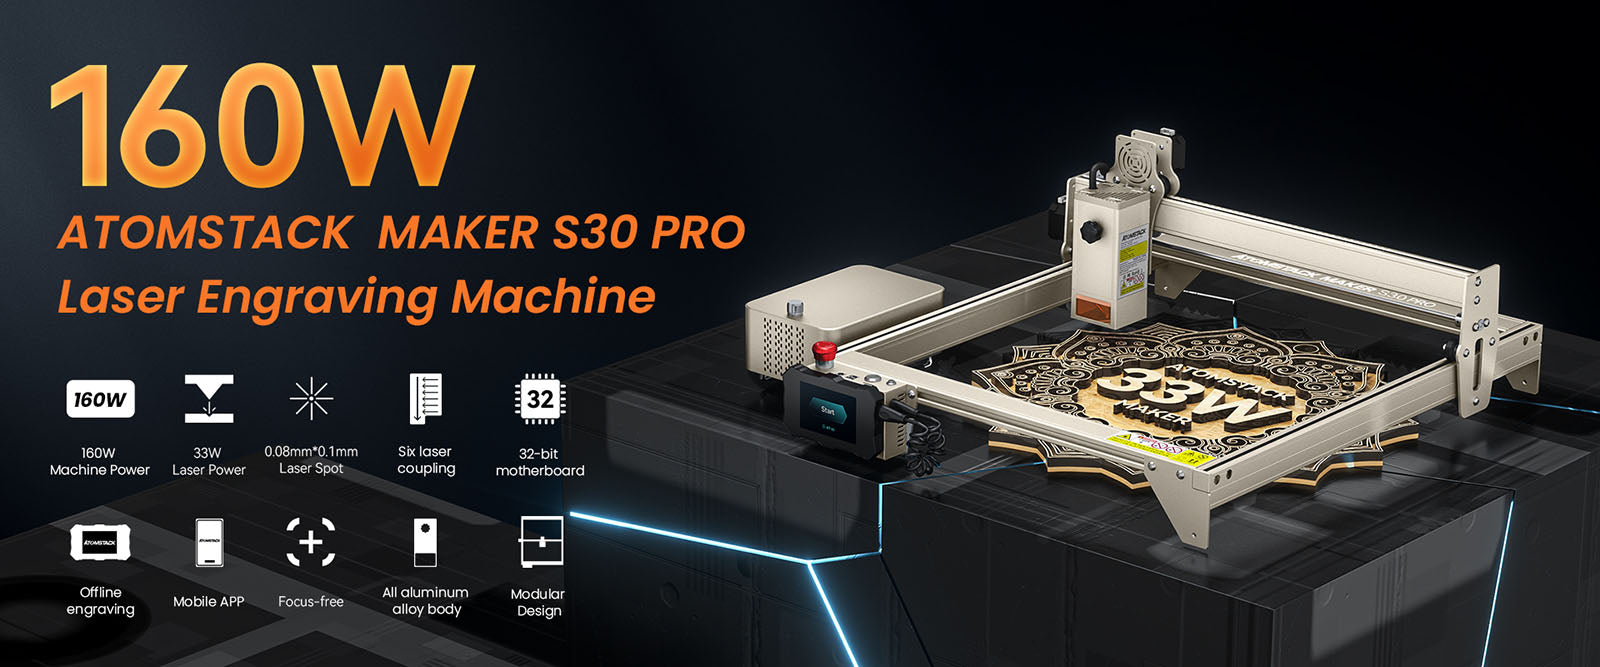 Atomstack S30 PRO 36W Laser Engraver Engraving Machine with Air Assist Pump  C3K8 - Helia Beer Co